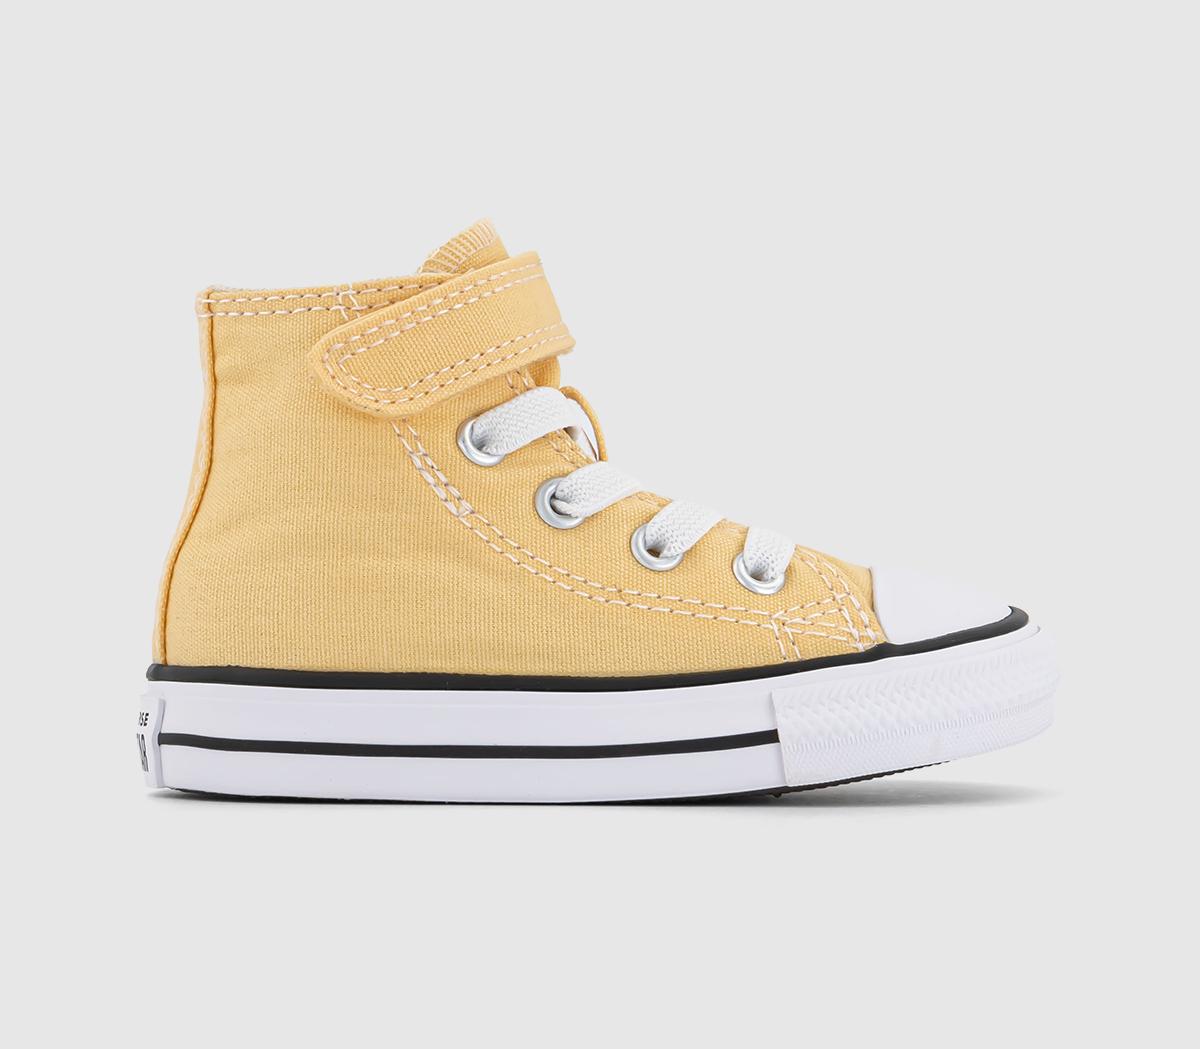 ConverseAll Star Hi 1VLace Infant TrainersAfternoon Sun White Black